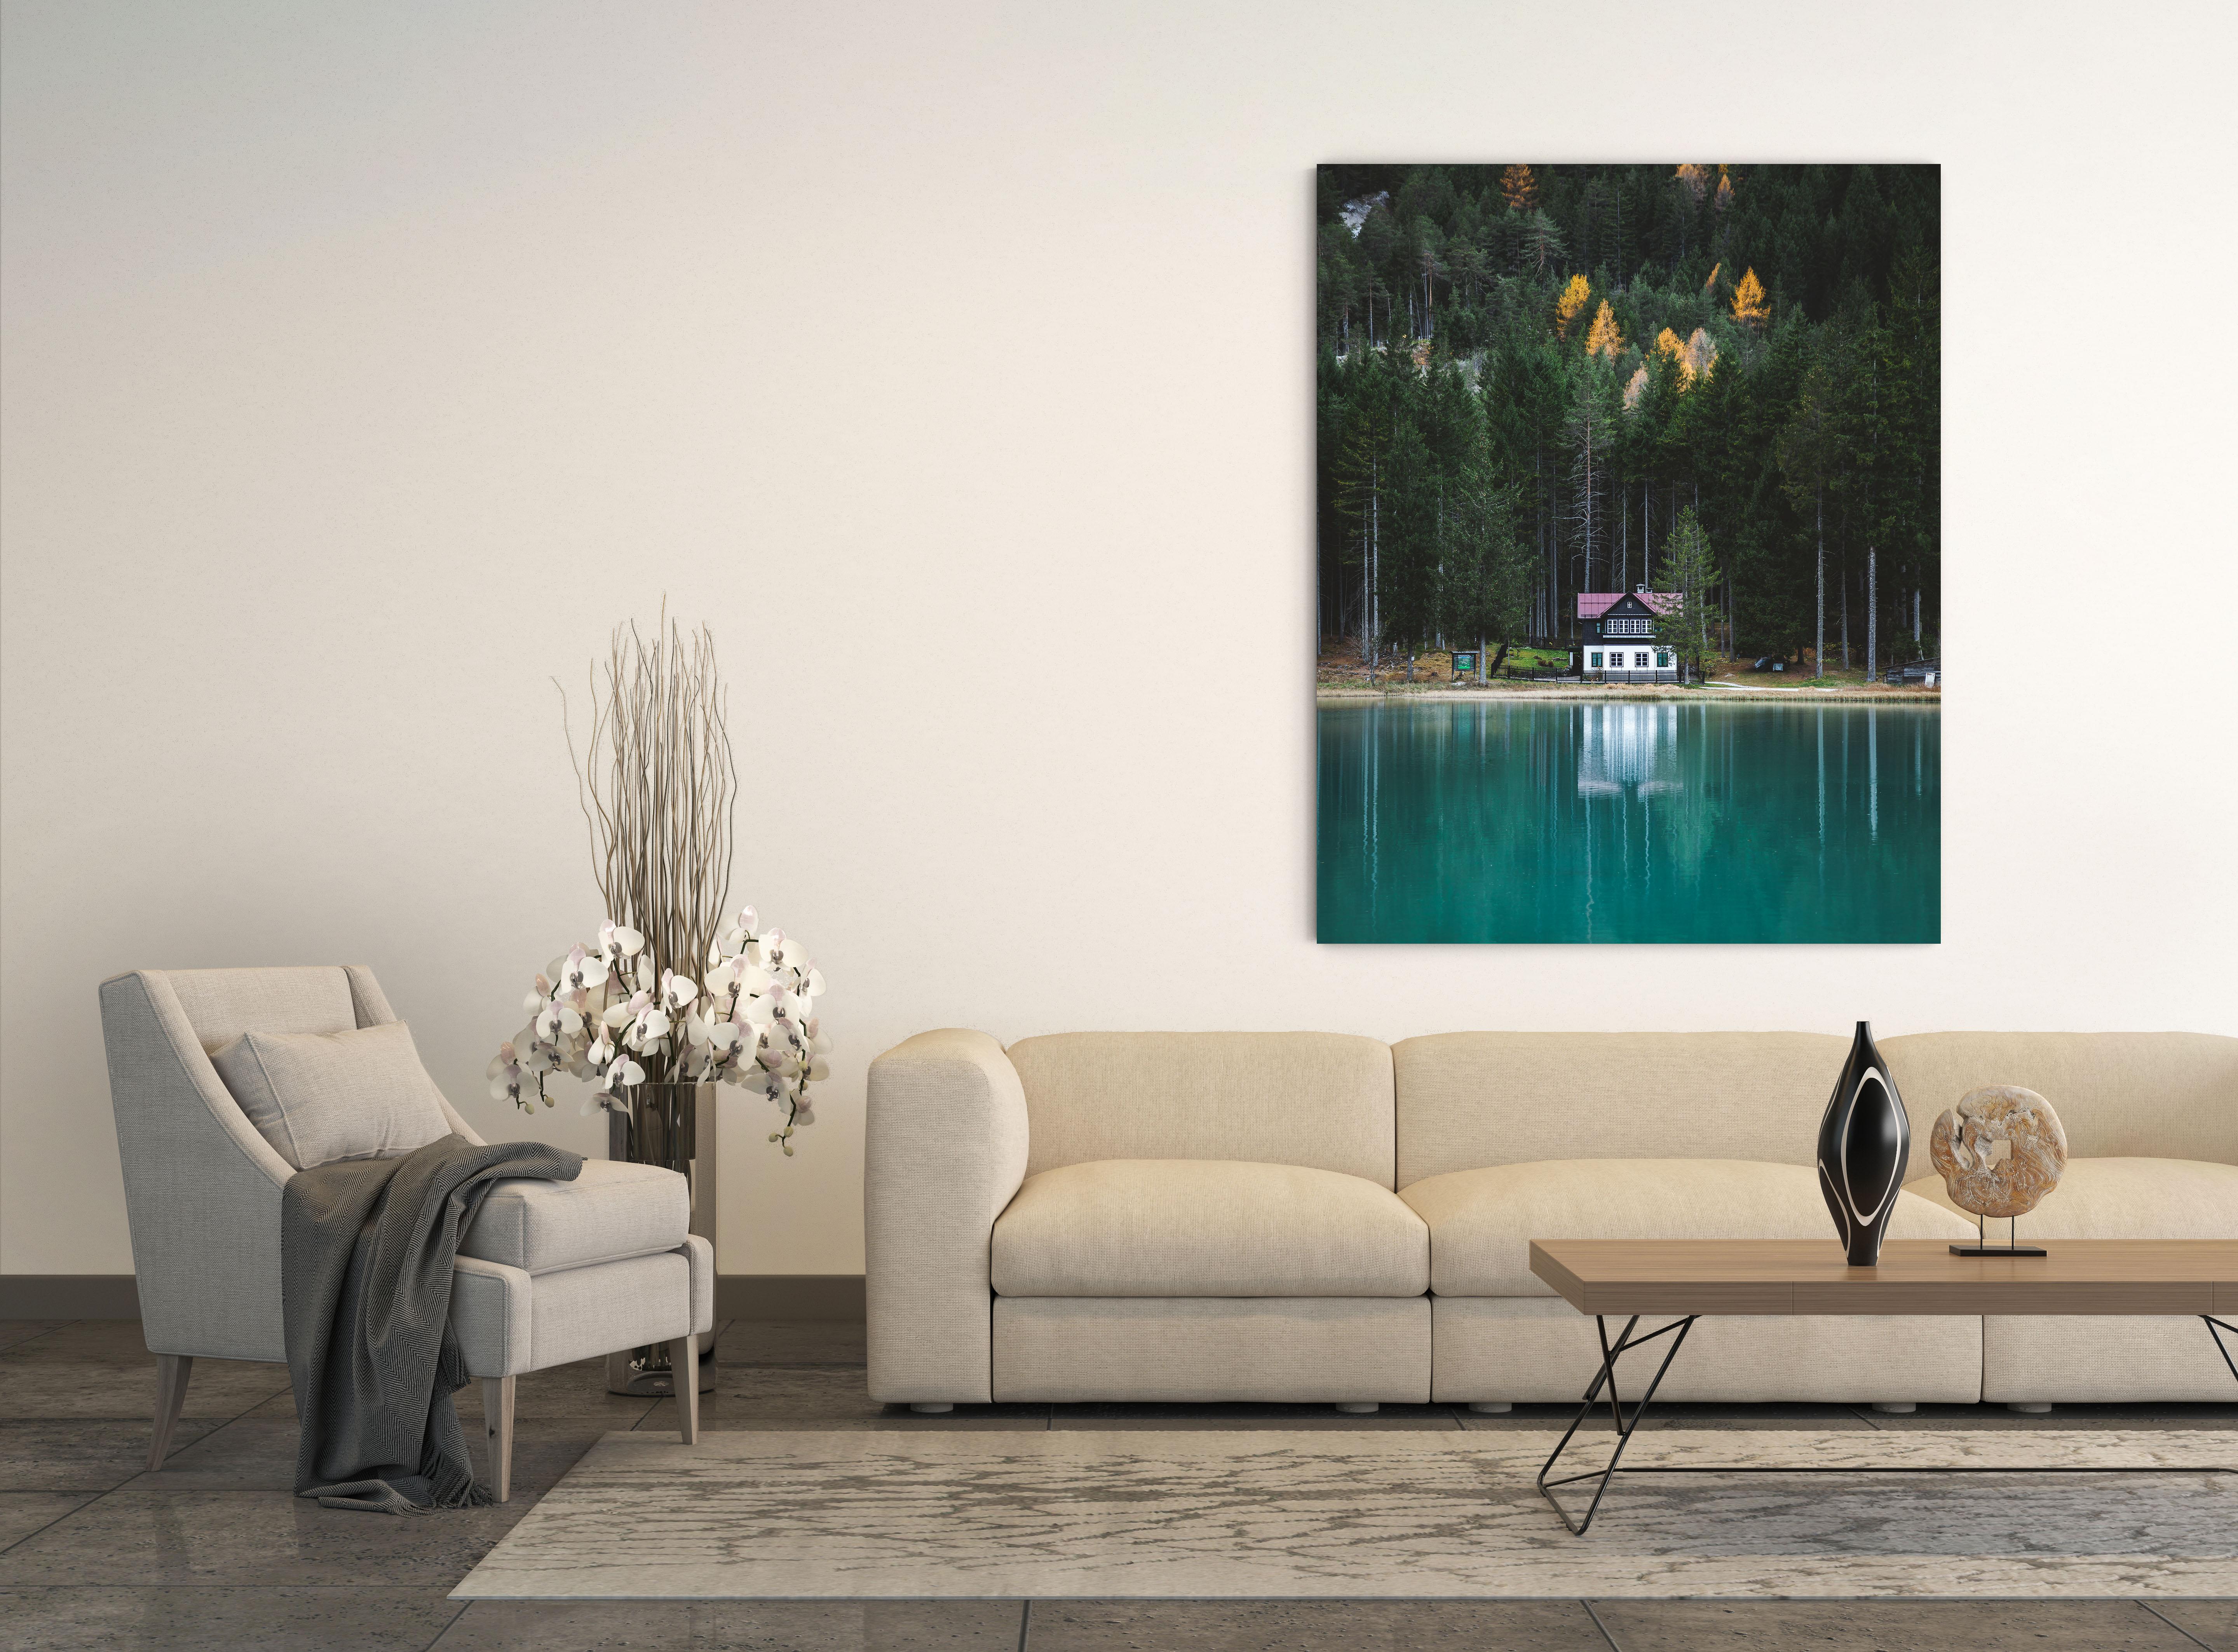 Lake House Dolomites

Photographed by: Christiaan Nies
Date: October 2017
Dimensions: Width 120 cm x height 150 cm. Width 47.24 inch x height 59.06 inch
Limited edition of 5 + 1 AP in the size of 120 cm x 150 cm. 

About the photo

This